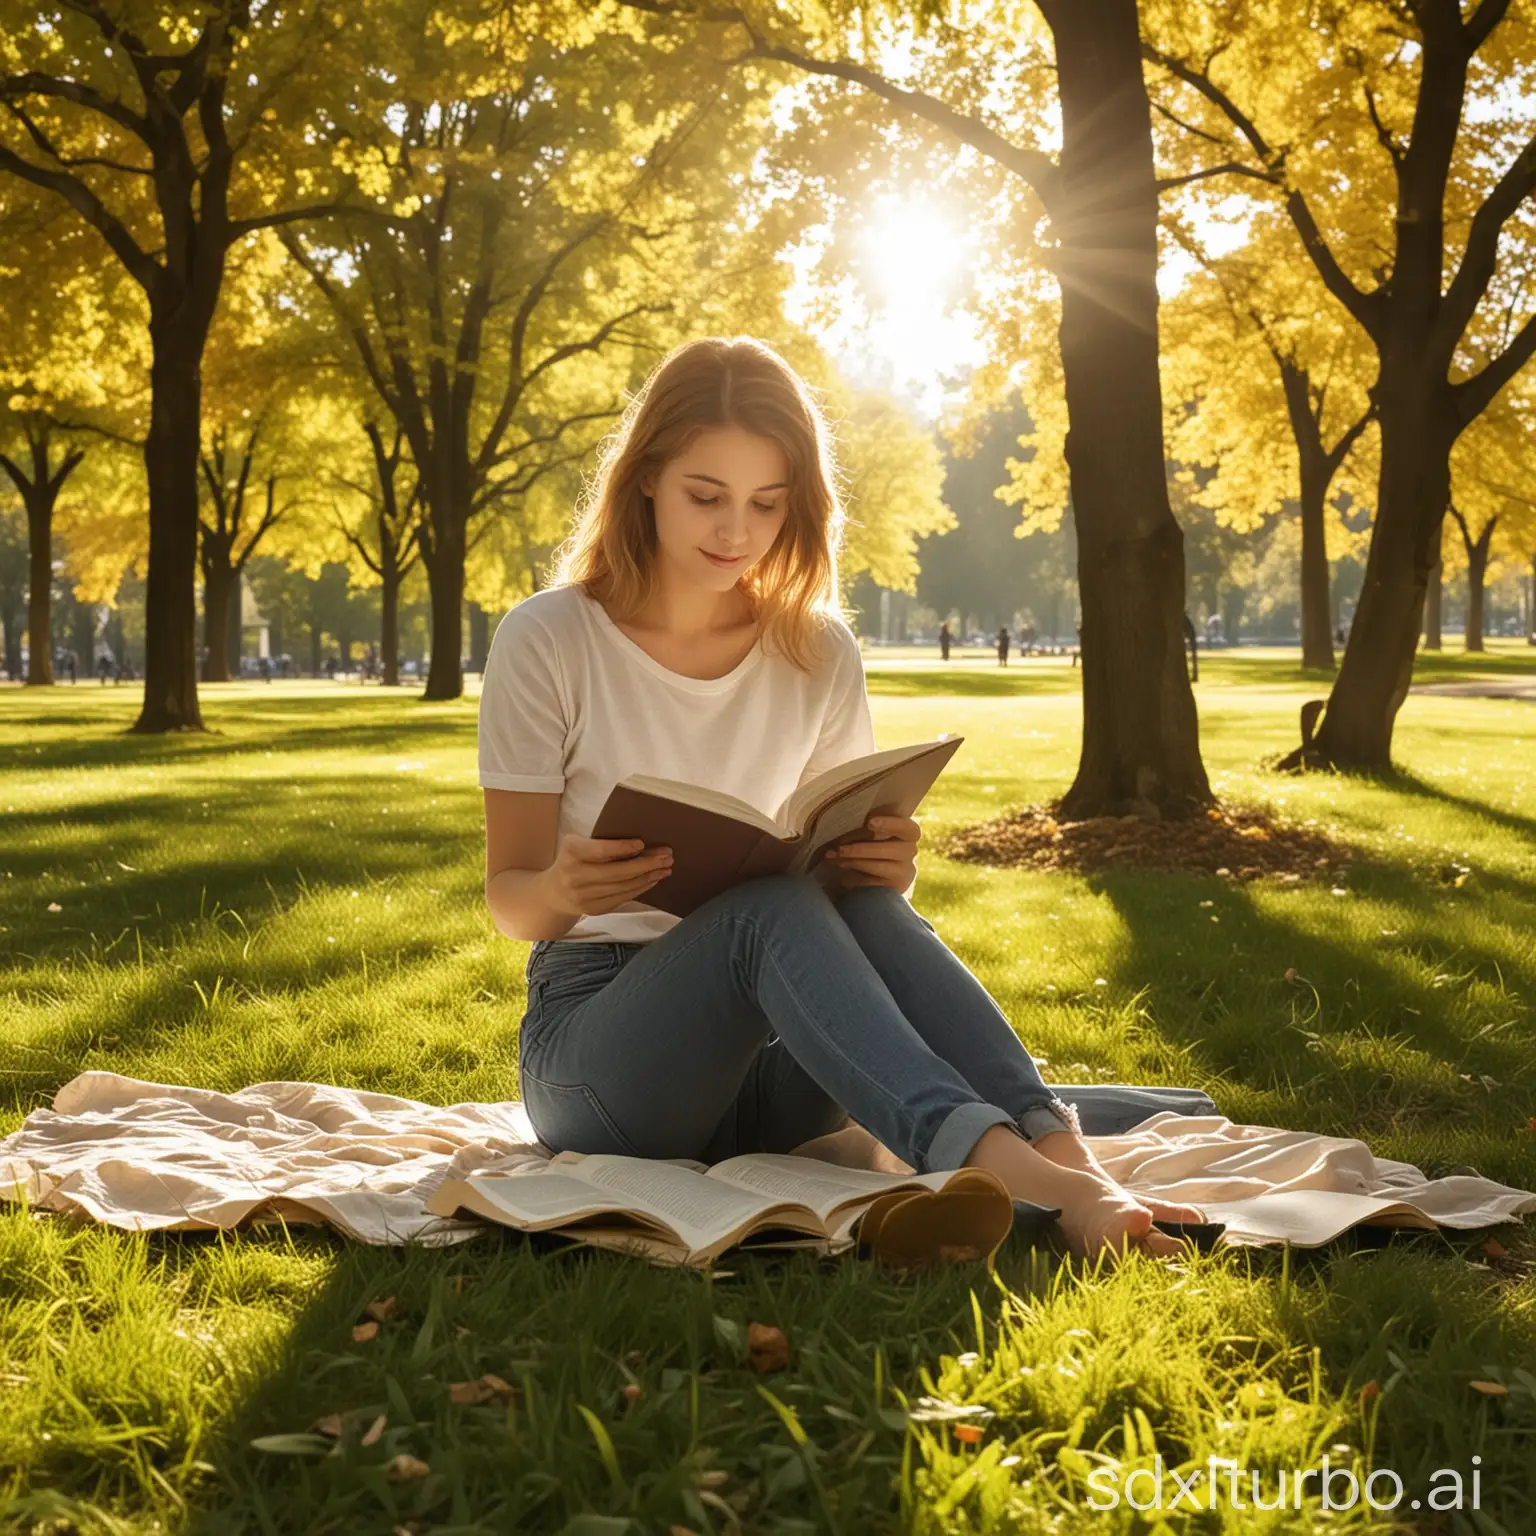 reading a book in a sunny park